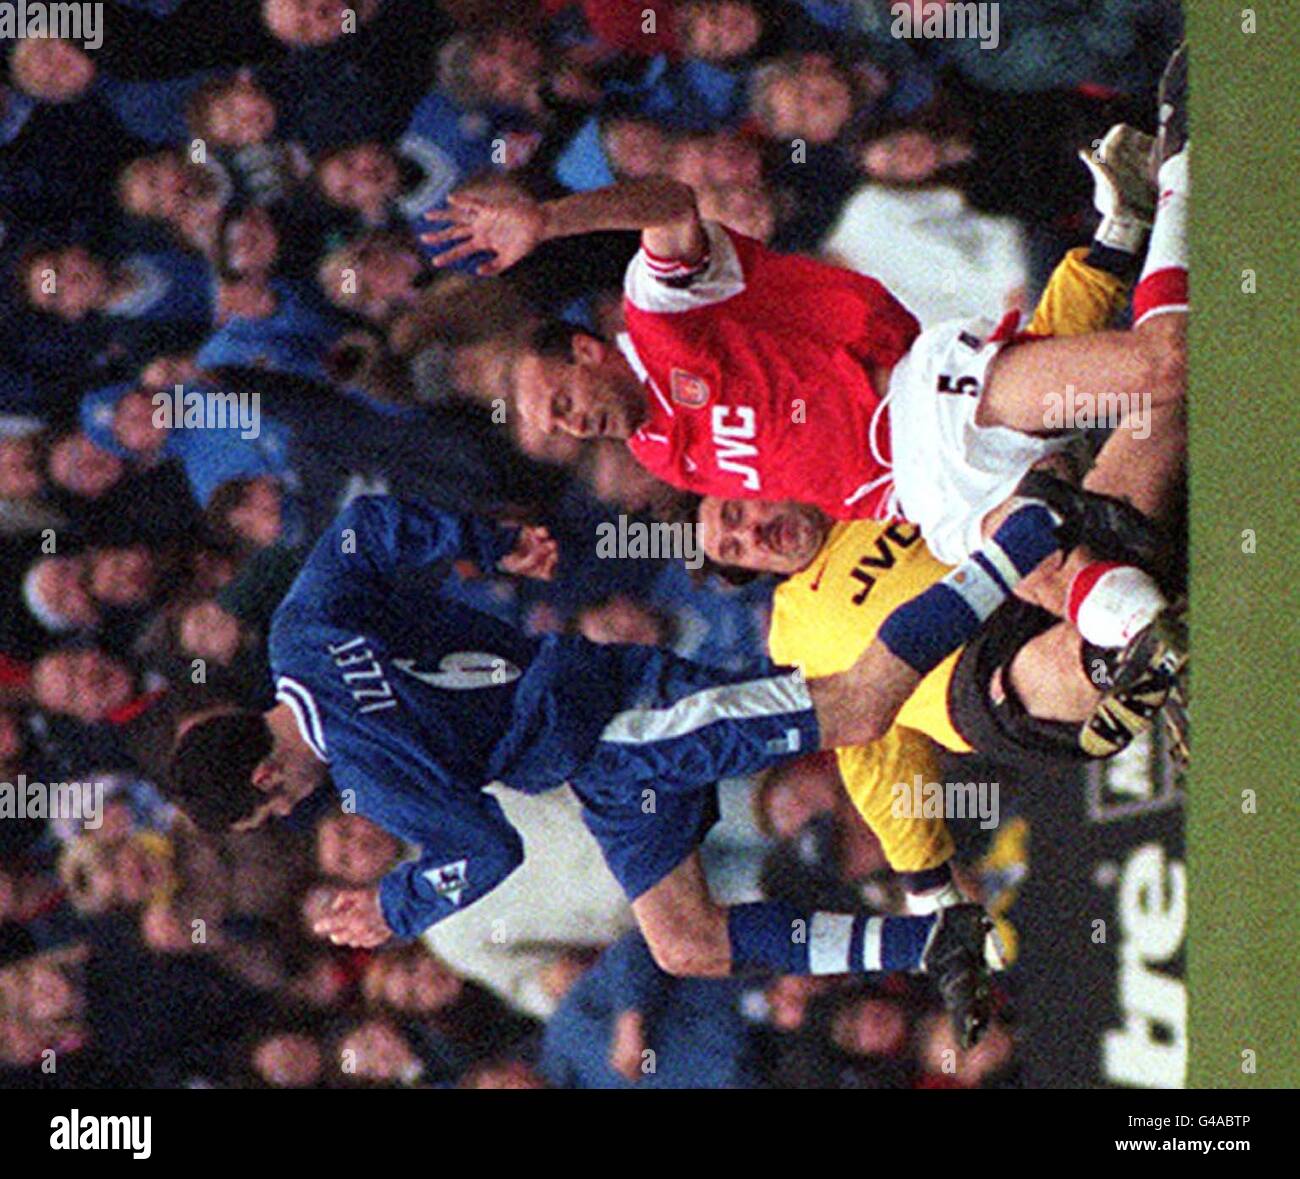 Arsenal goalkeeper David Seaman, well out of his area with his team mate Steve Bould as they try to tackle Leicester City's Muzzy Izzet, which led to Leicester's Neil Lennon being handed a goal on a plate during this afternoon's (Friday) Premiership clast at Highbury. Arsenal defeated Leicester City 2-1. Photo by Tom Hevezi/PA. Stock Photo